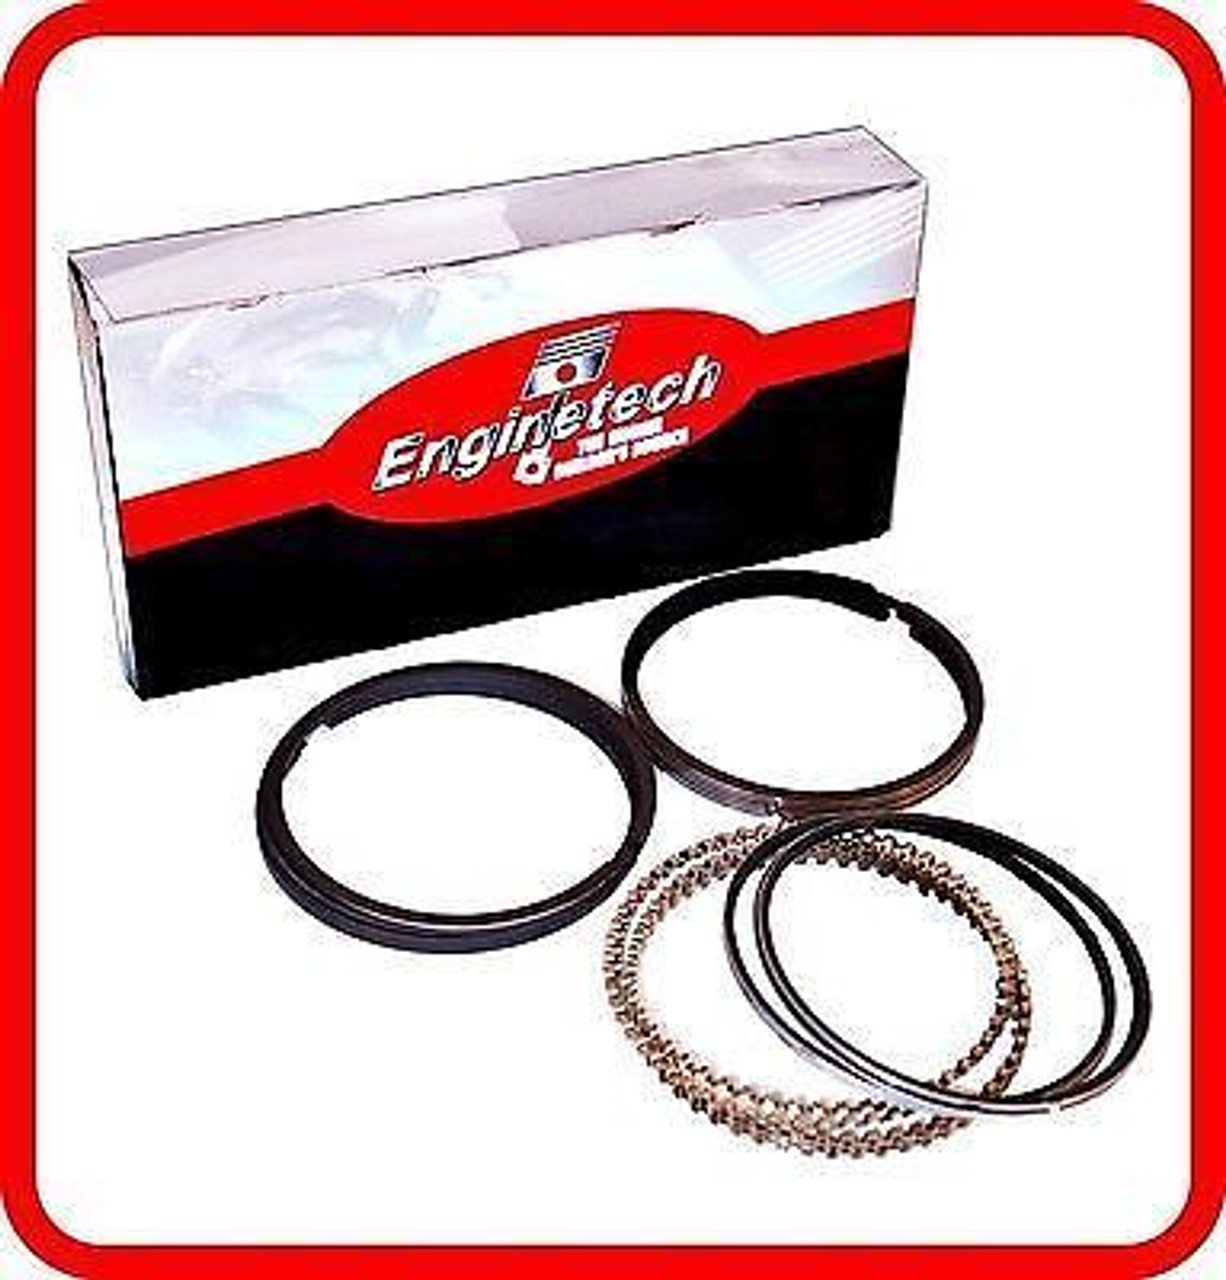 1991 Cadillac Commercial Chassis 4.9L Engine Piston Ring Set M92138 -38